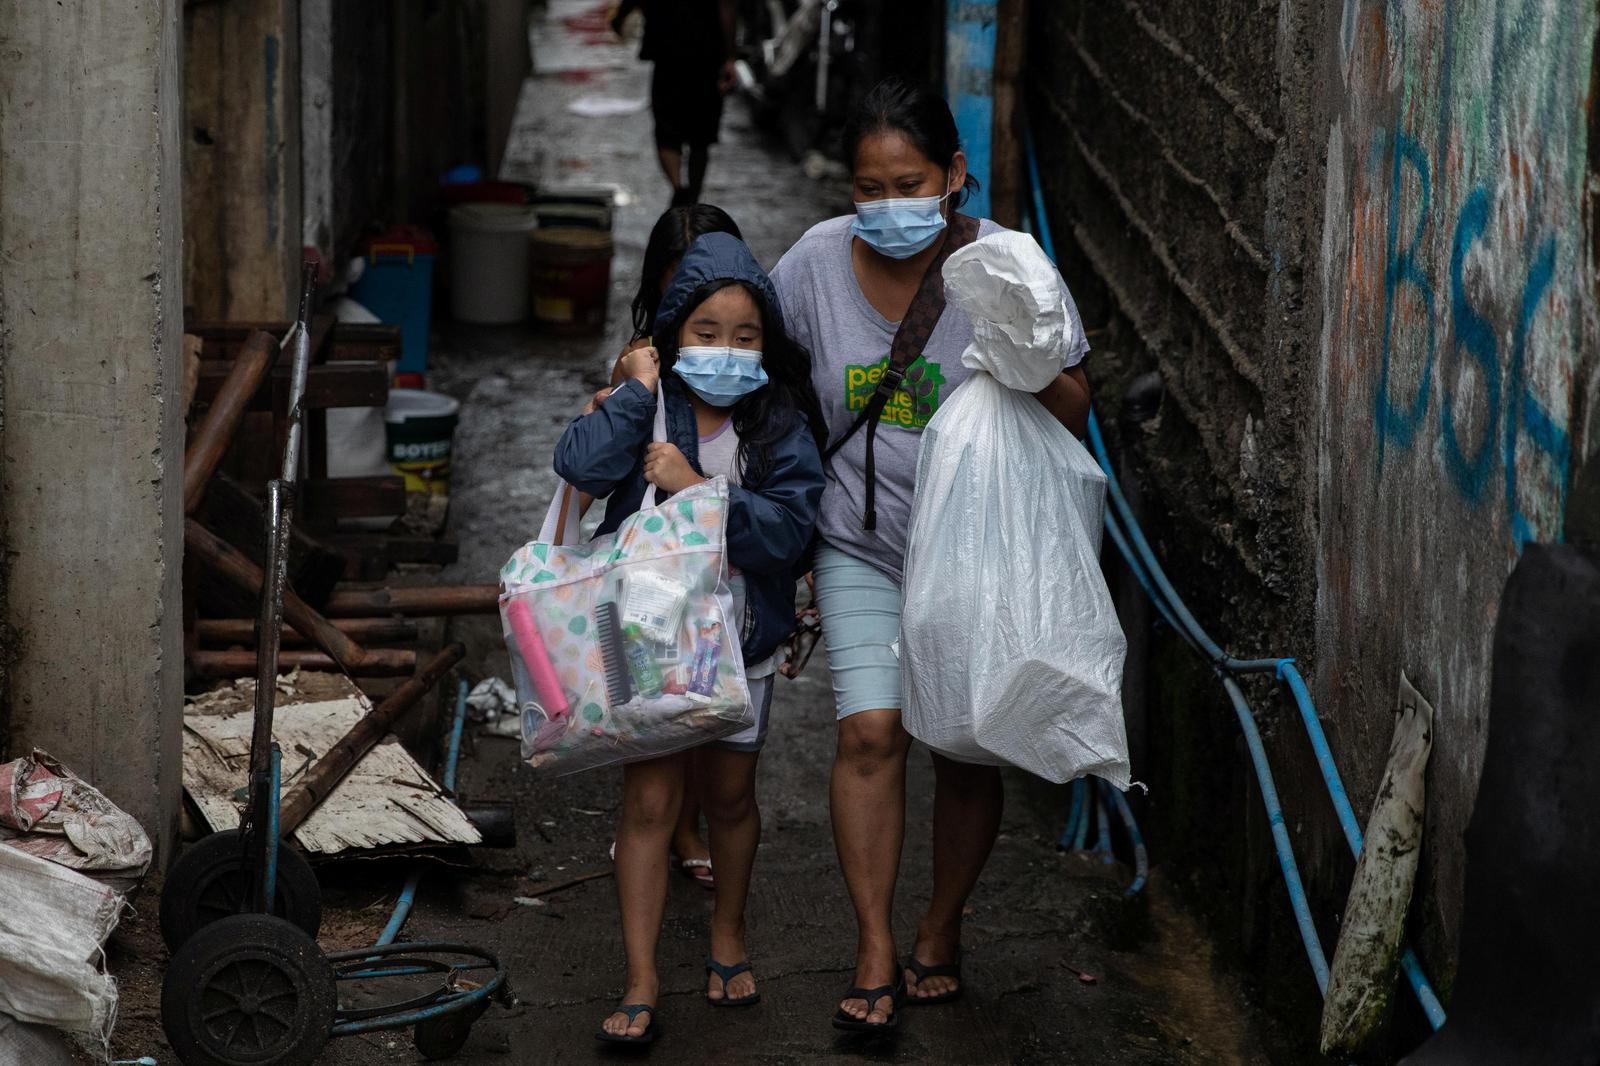 A woman and a child carry belongings as they evacuate from a coastal community ahead of Typhoon Vamco, in Sucat, Muntinlupa, Metro Manila, Philippines, November 11, 2020. Photo: Reuters